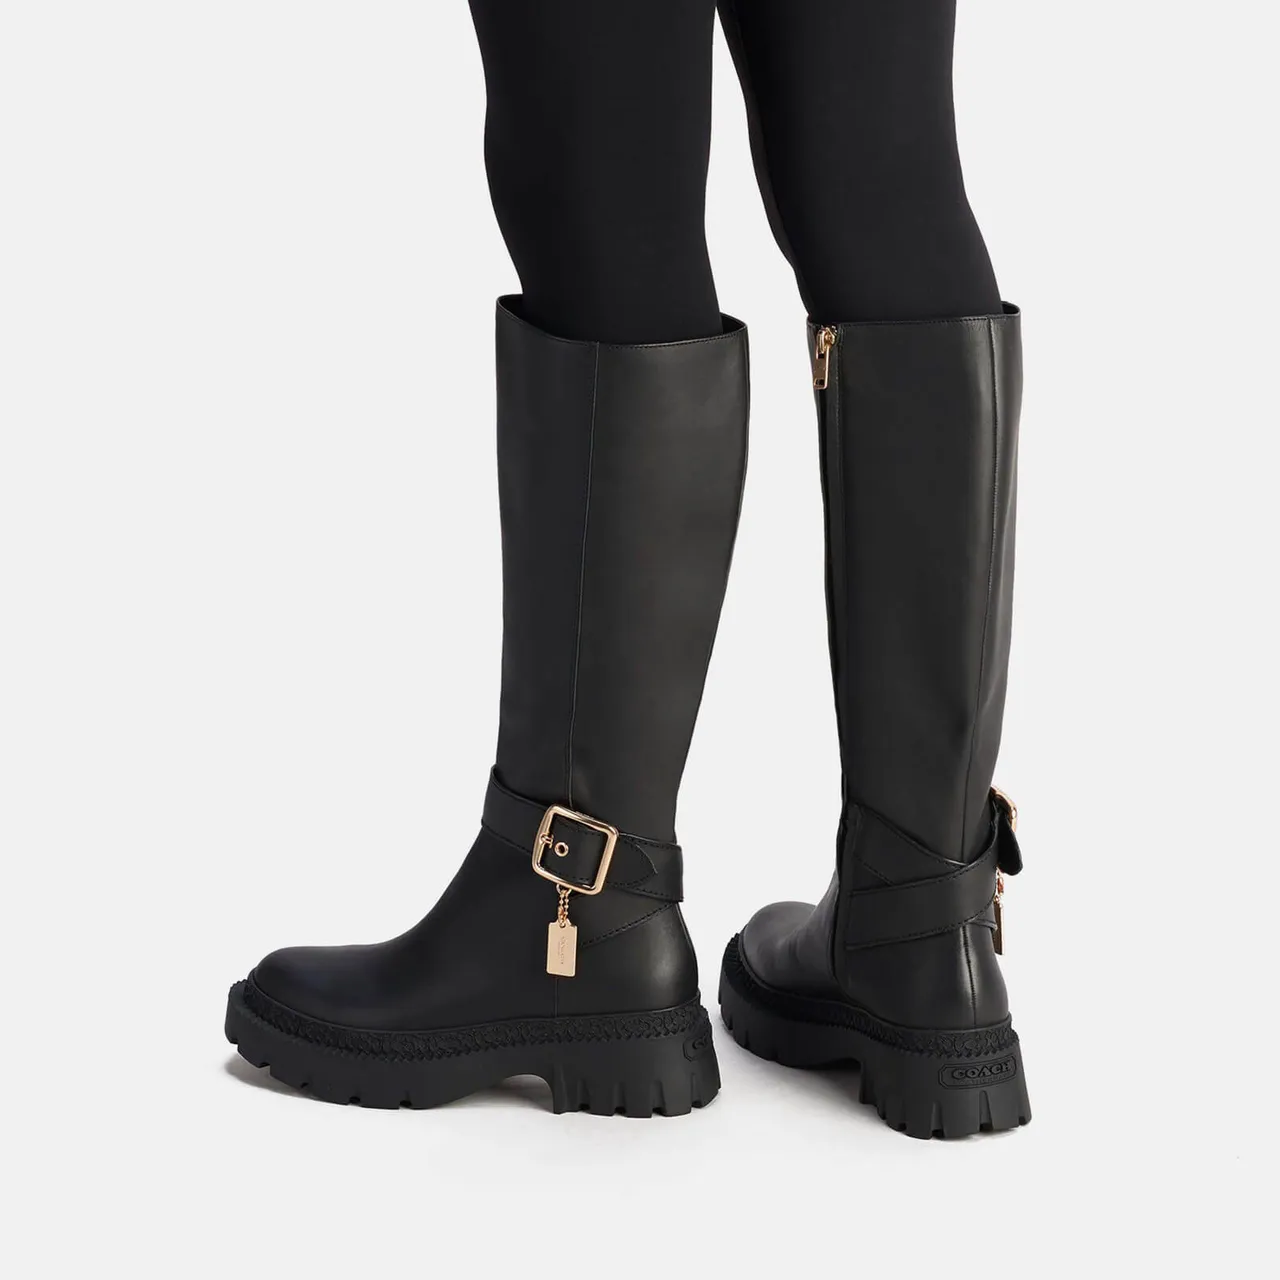 Coach James Leather Knee-High Boots